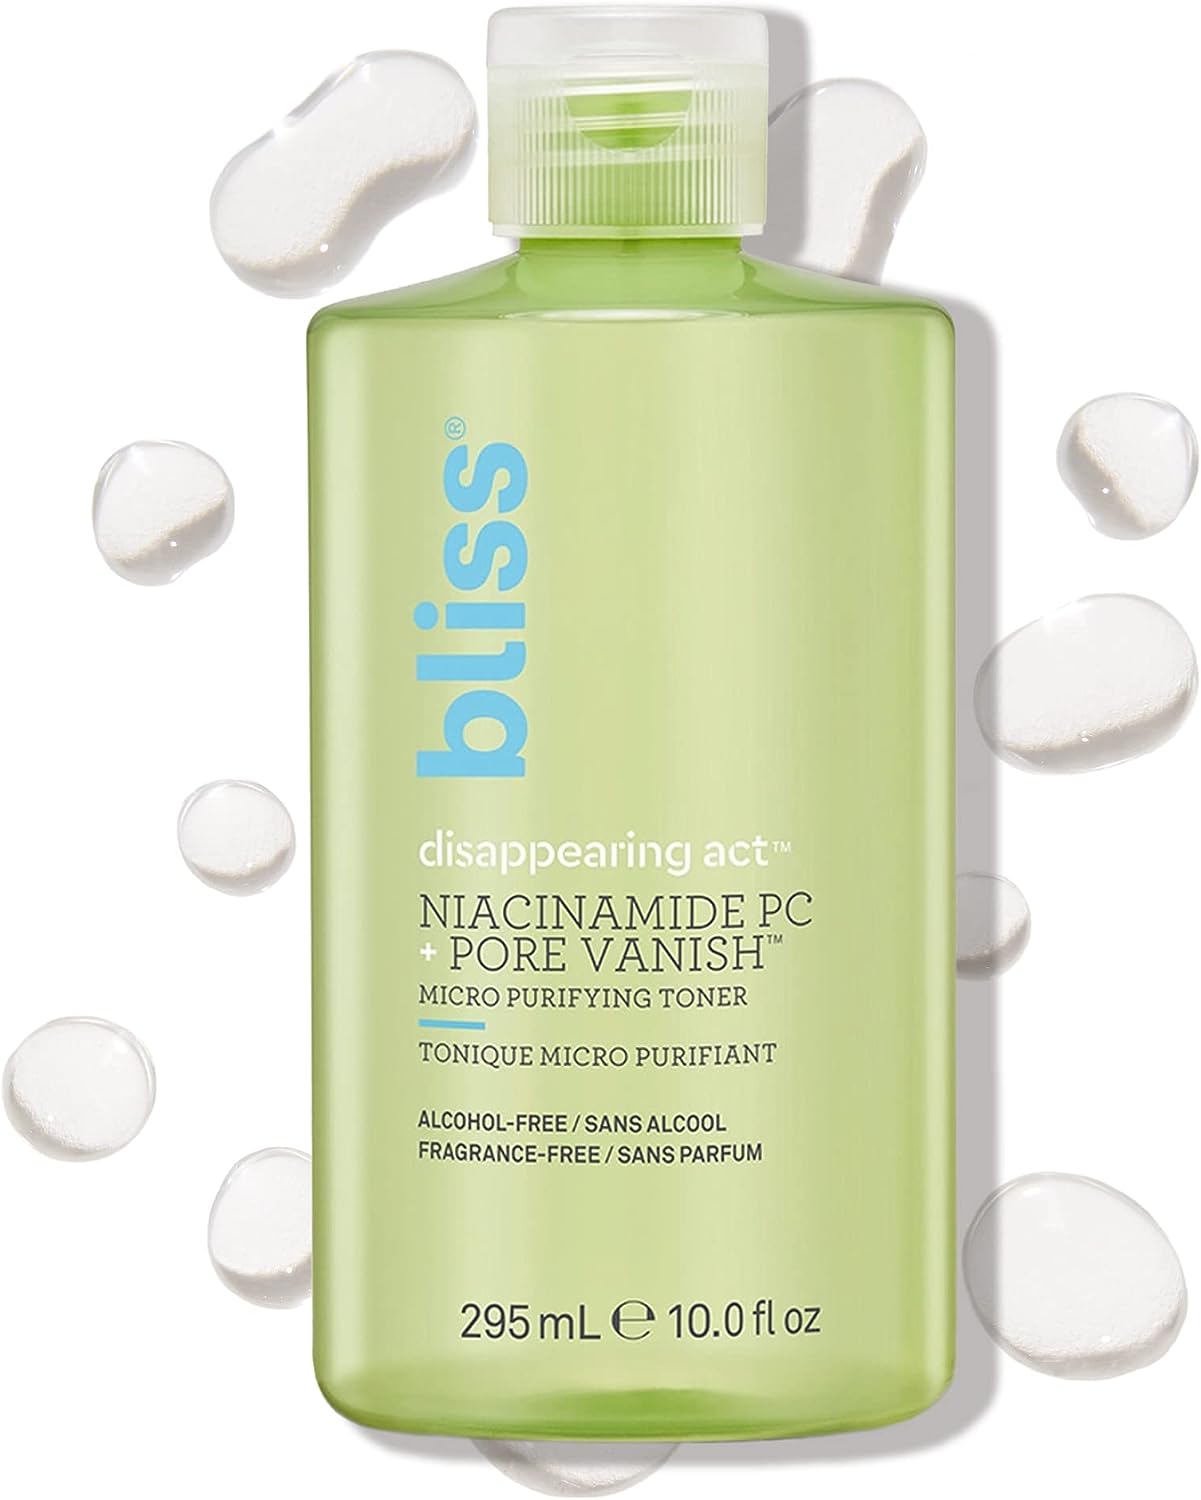 Bliss Disappearing Act Niacinamide Toner - 10   - Pore Vanish™ Complex - Purifies and Minimizes Pores - Alcohol-Free Face Toner - Clean - Vegan & Cruelty Free